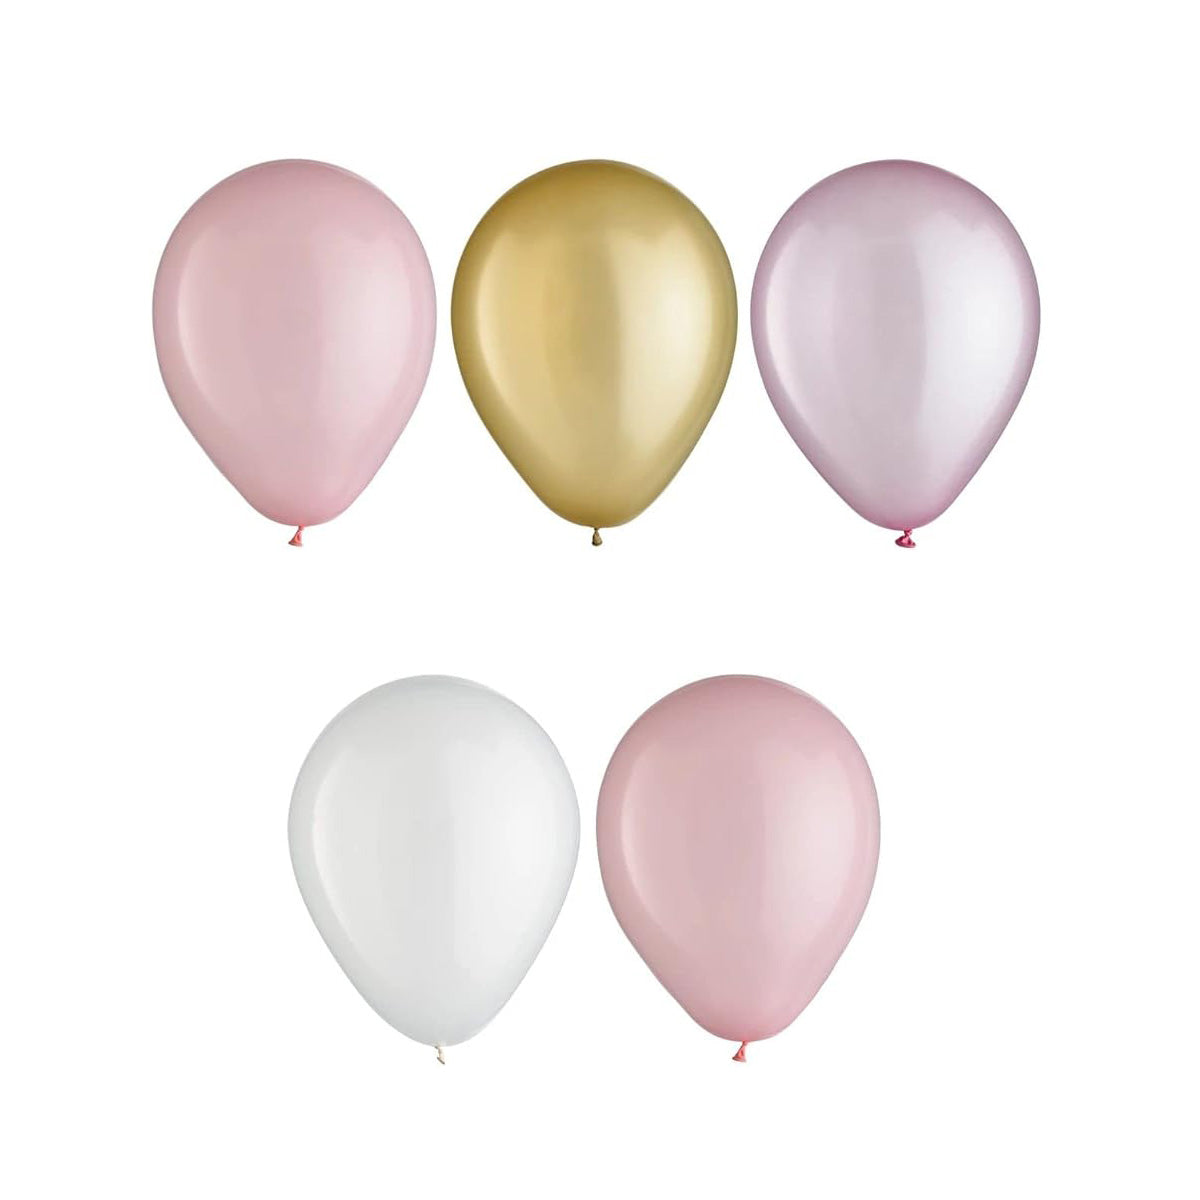 Pastel Pink Latex Balloons Assortments 11in 15pcs